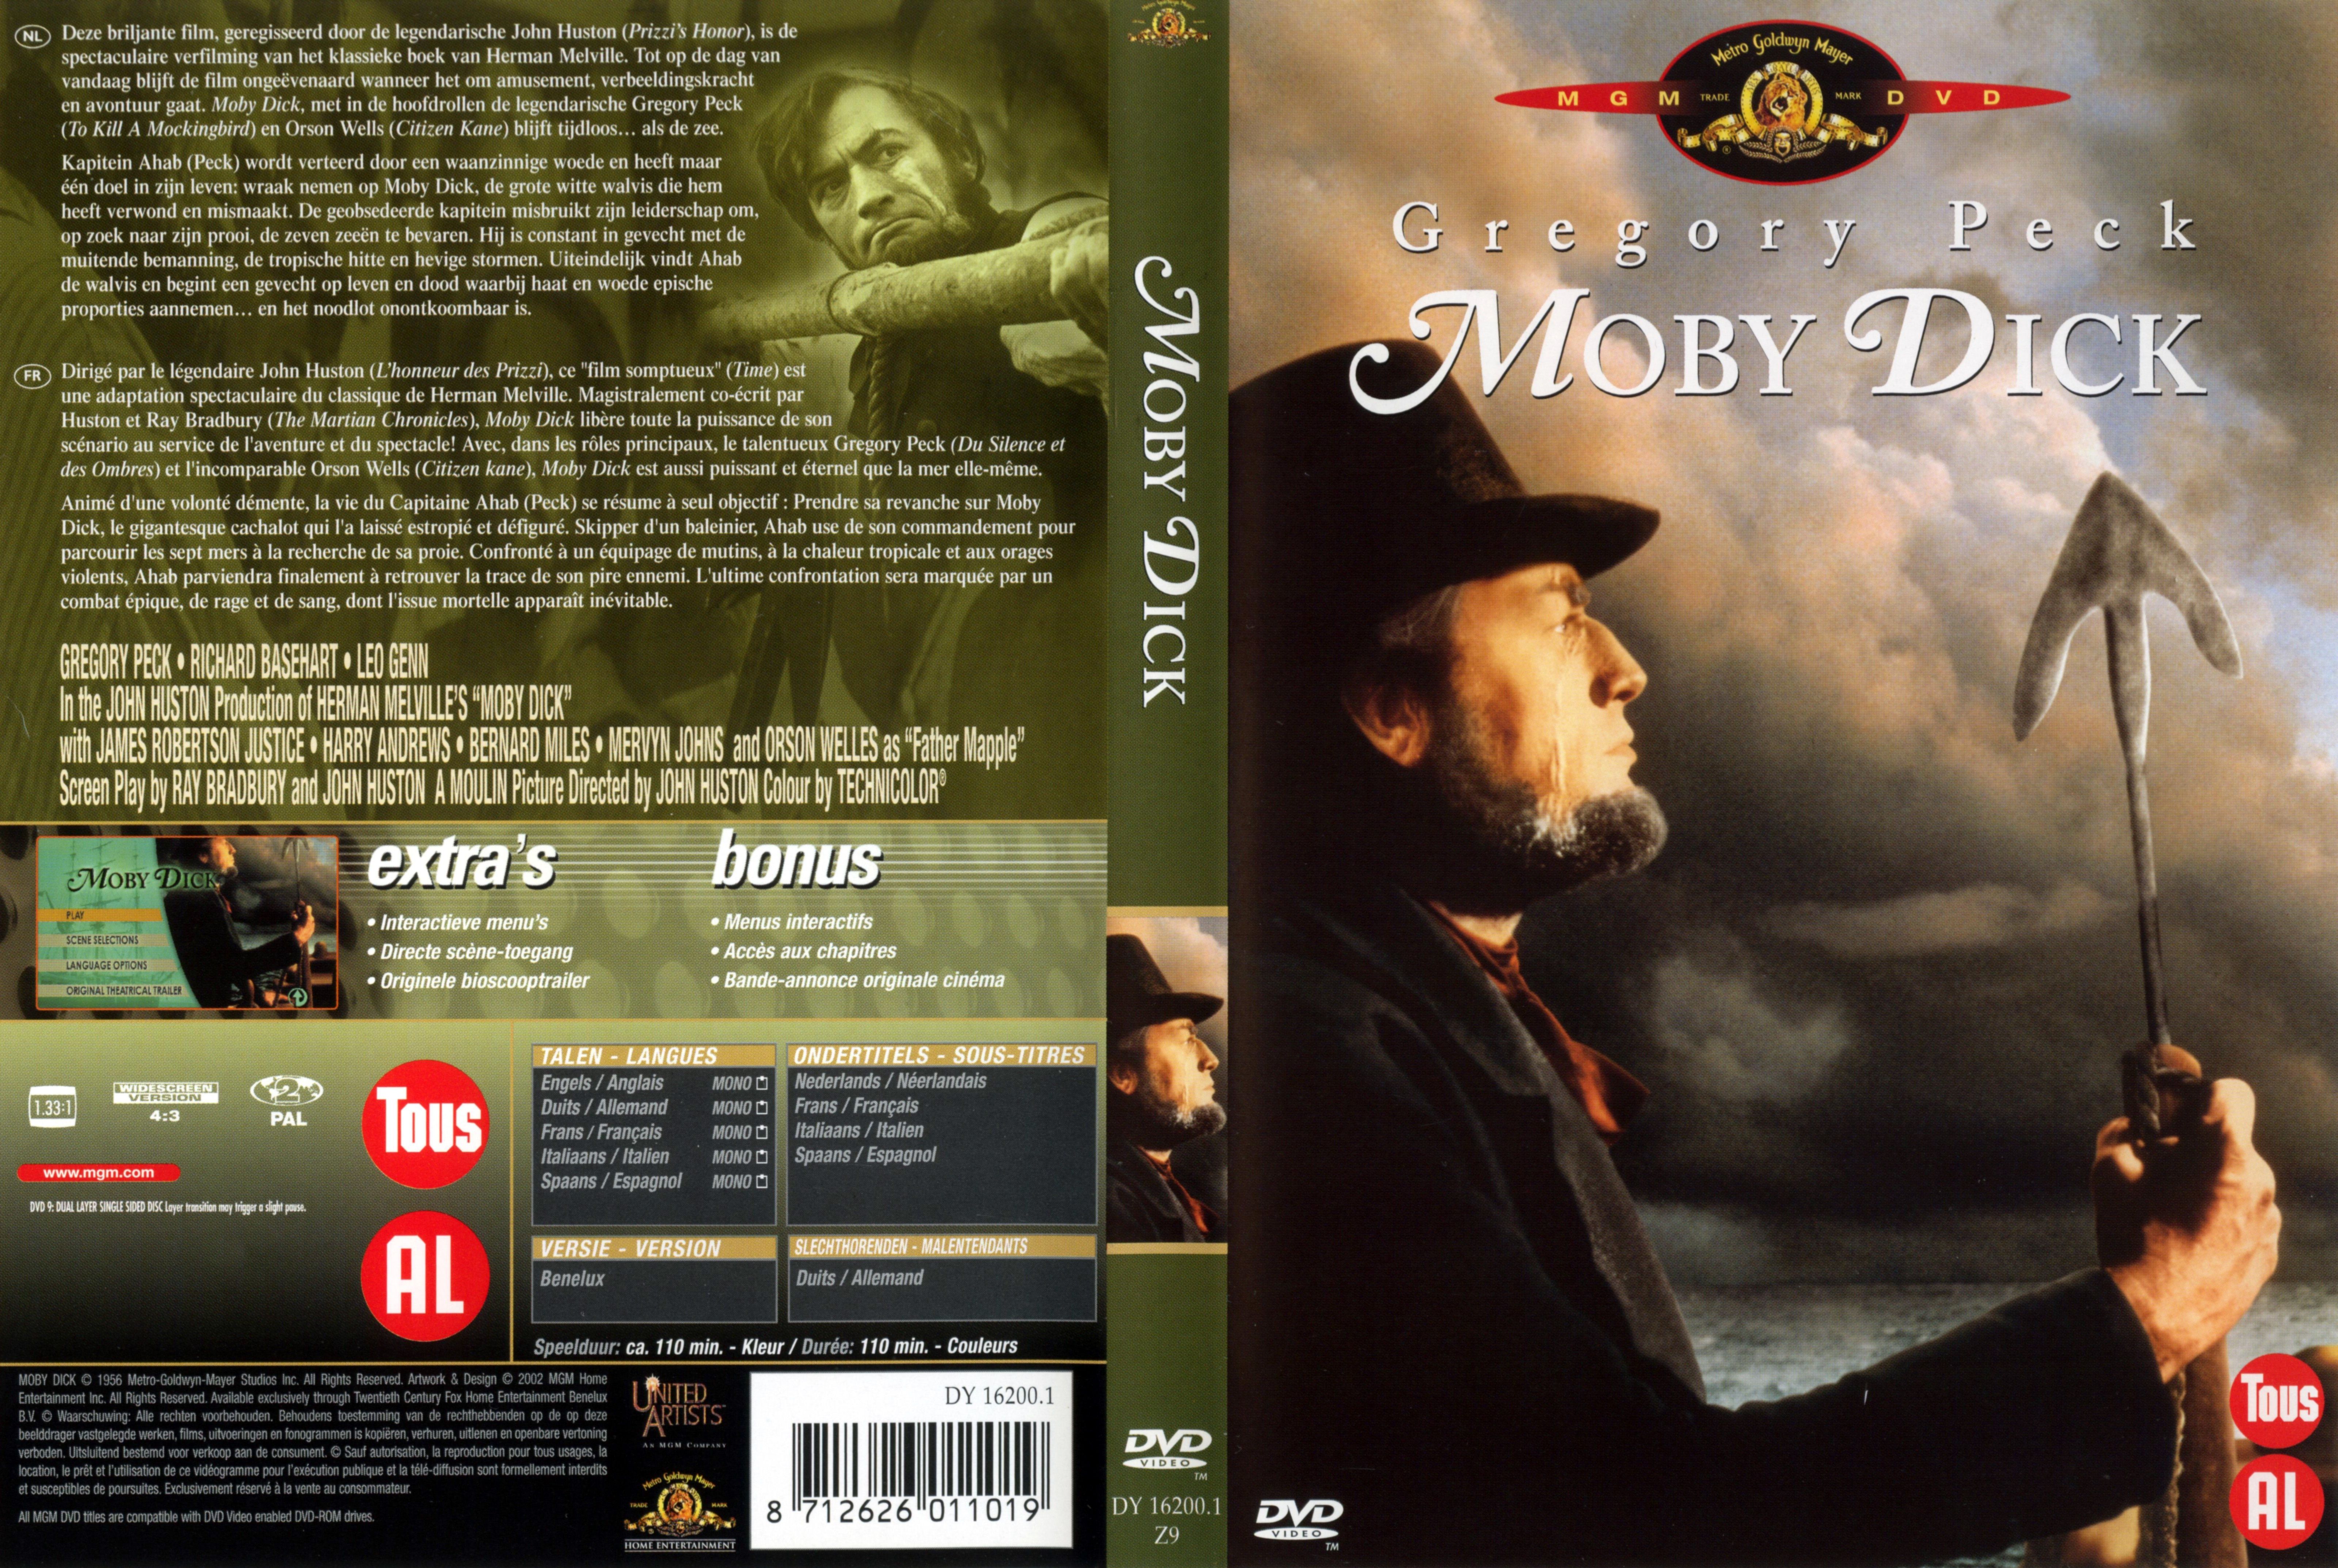 Songs and stories from moby dick dvd